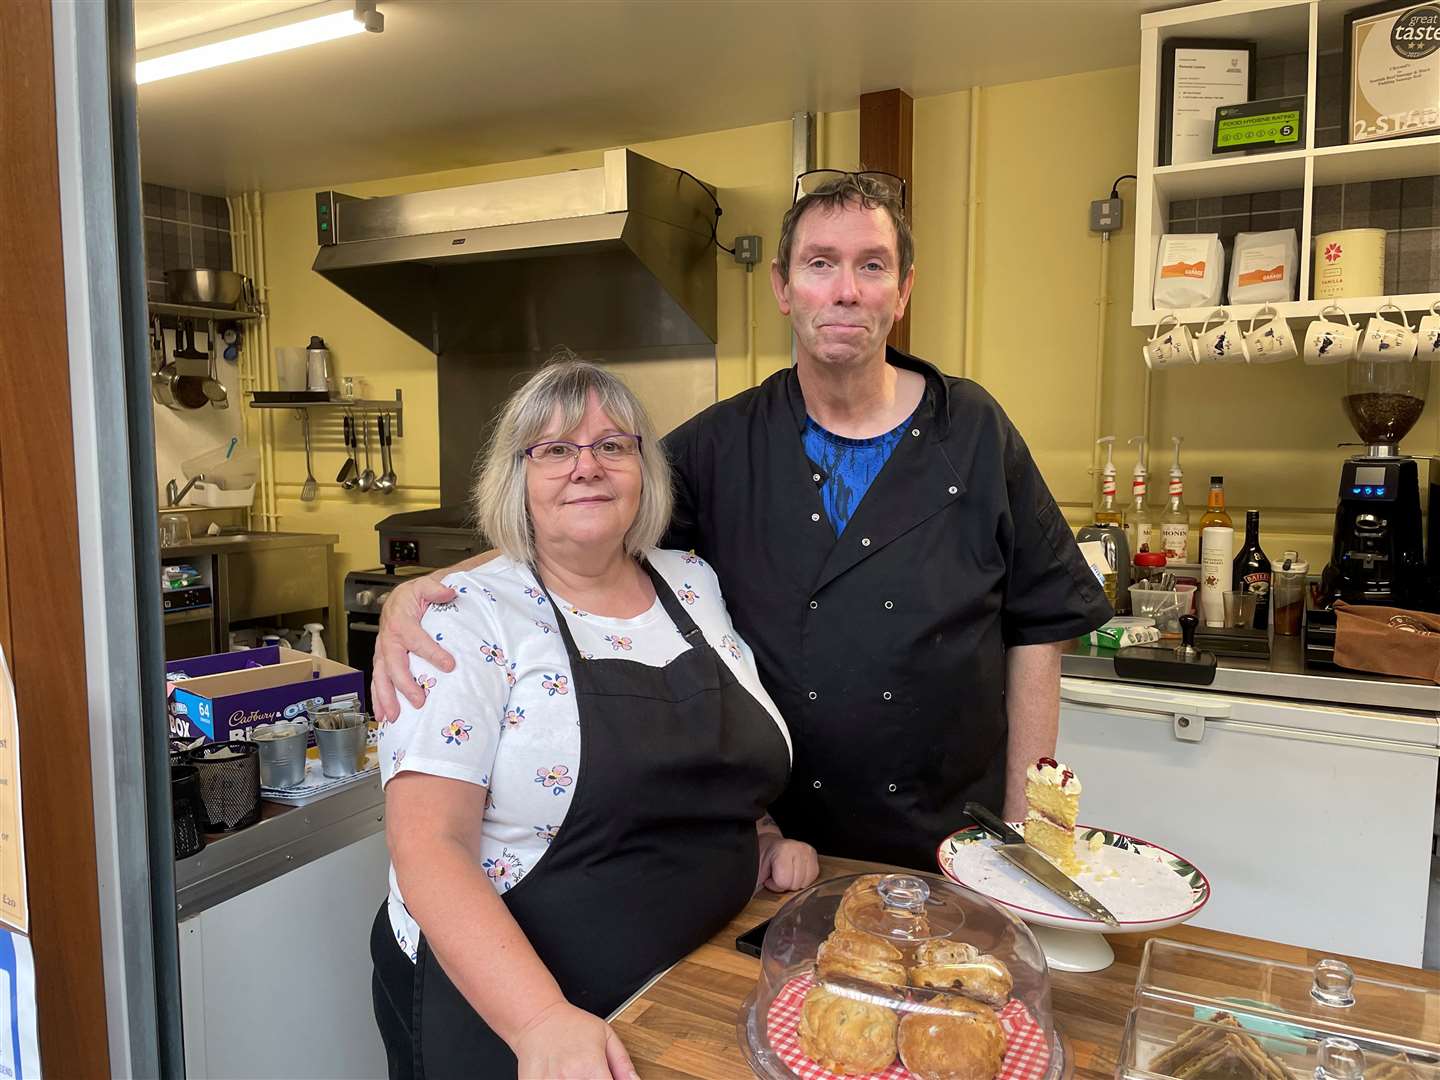 From left: Owners of Chrystal's, Faye and Rob Chrystal welcomed the news of a new firm taking over the reins